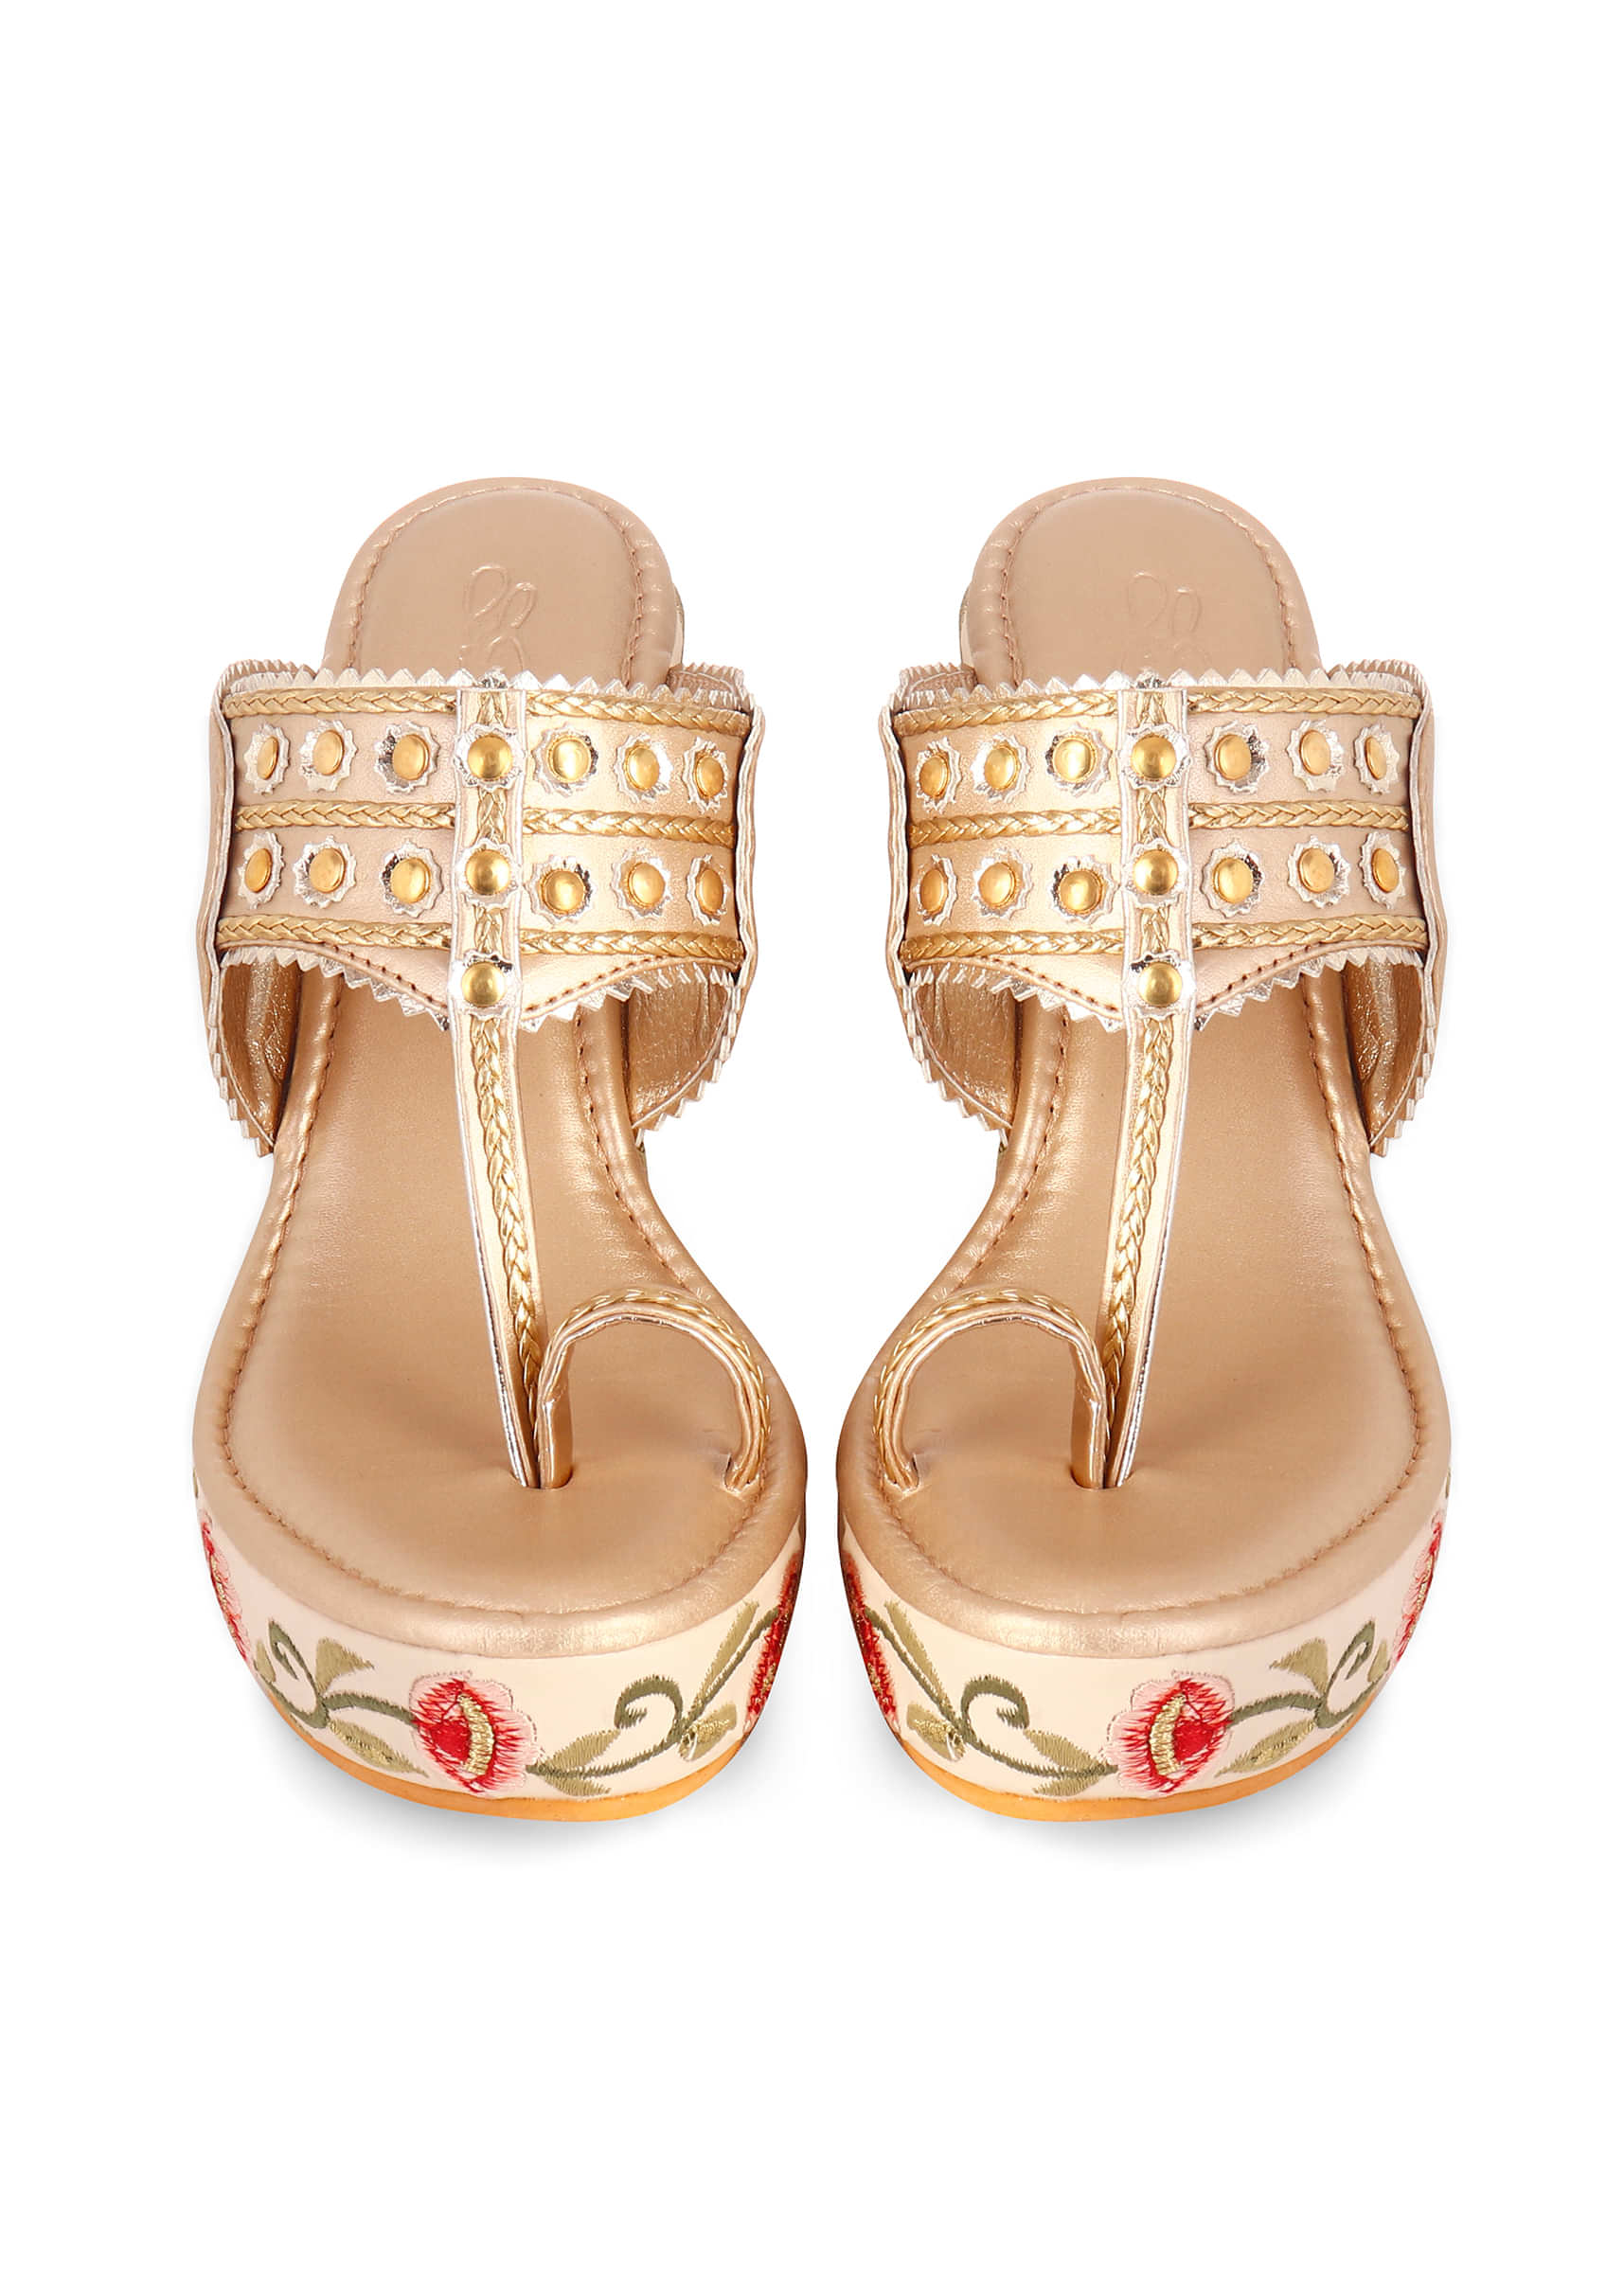 Multi-Colored Royal 4-Incha Kolhapuri Wedges With Embroidered Flowers